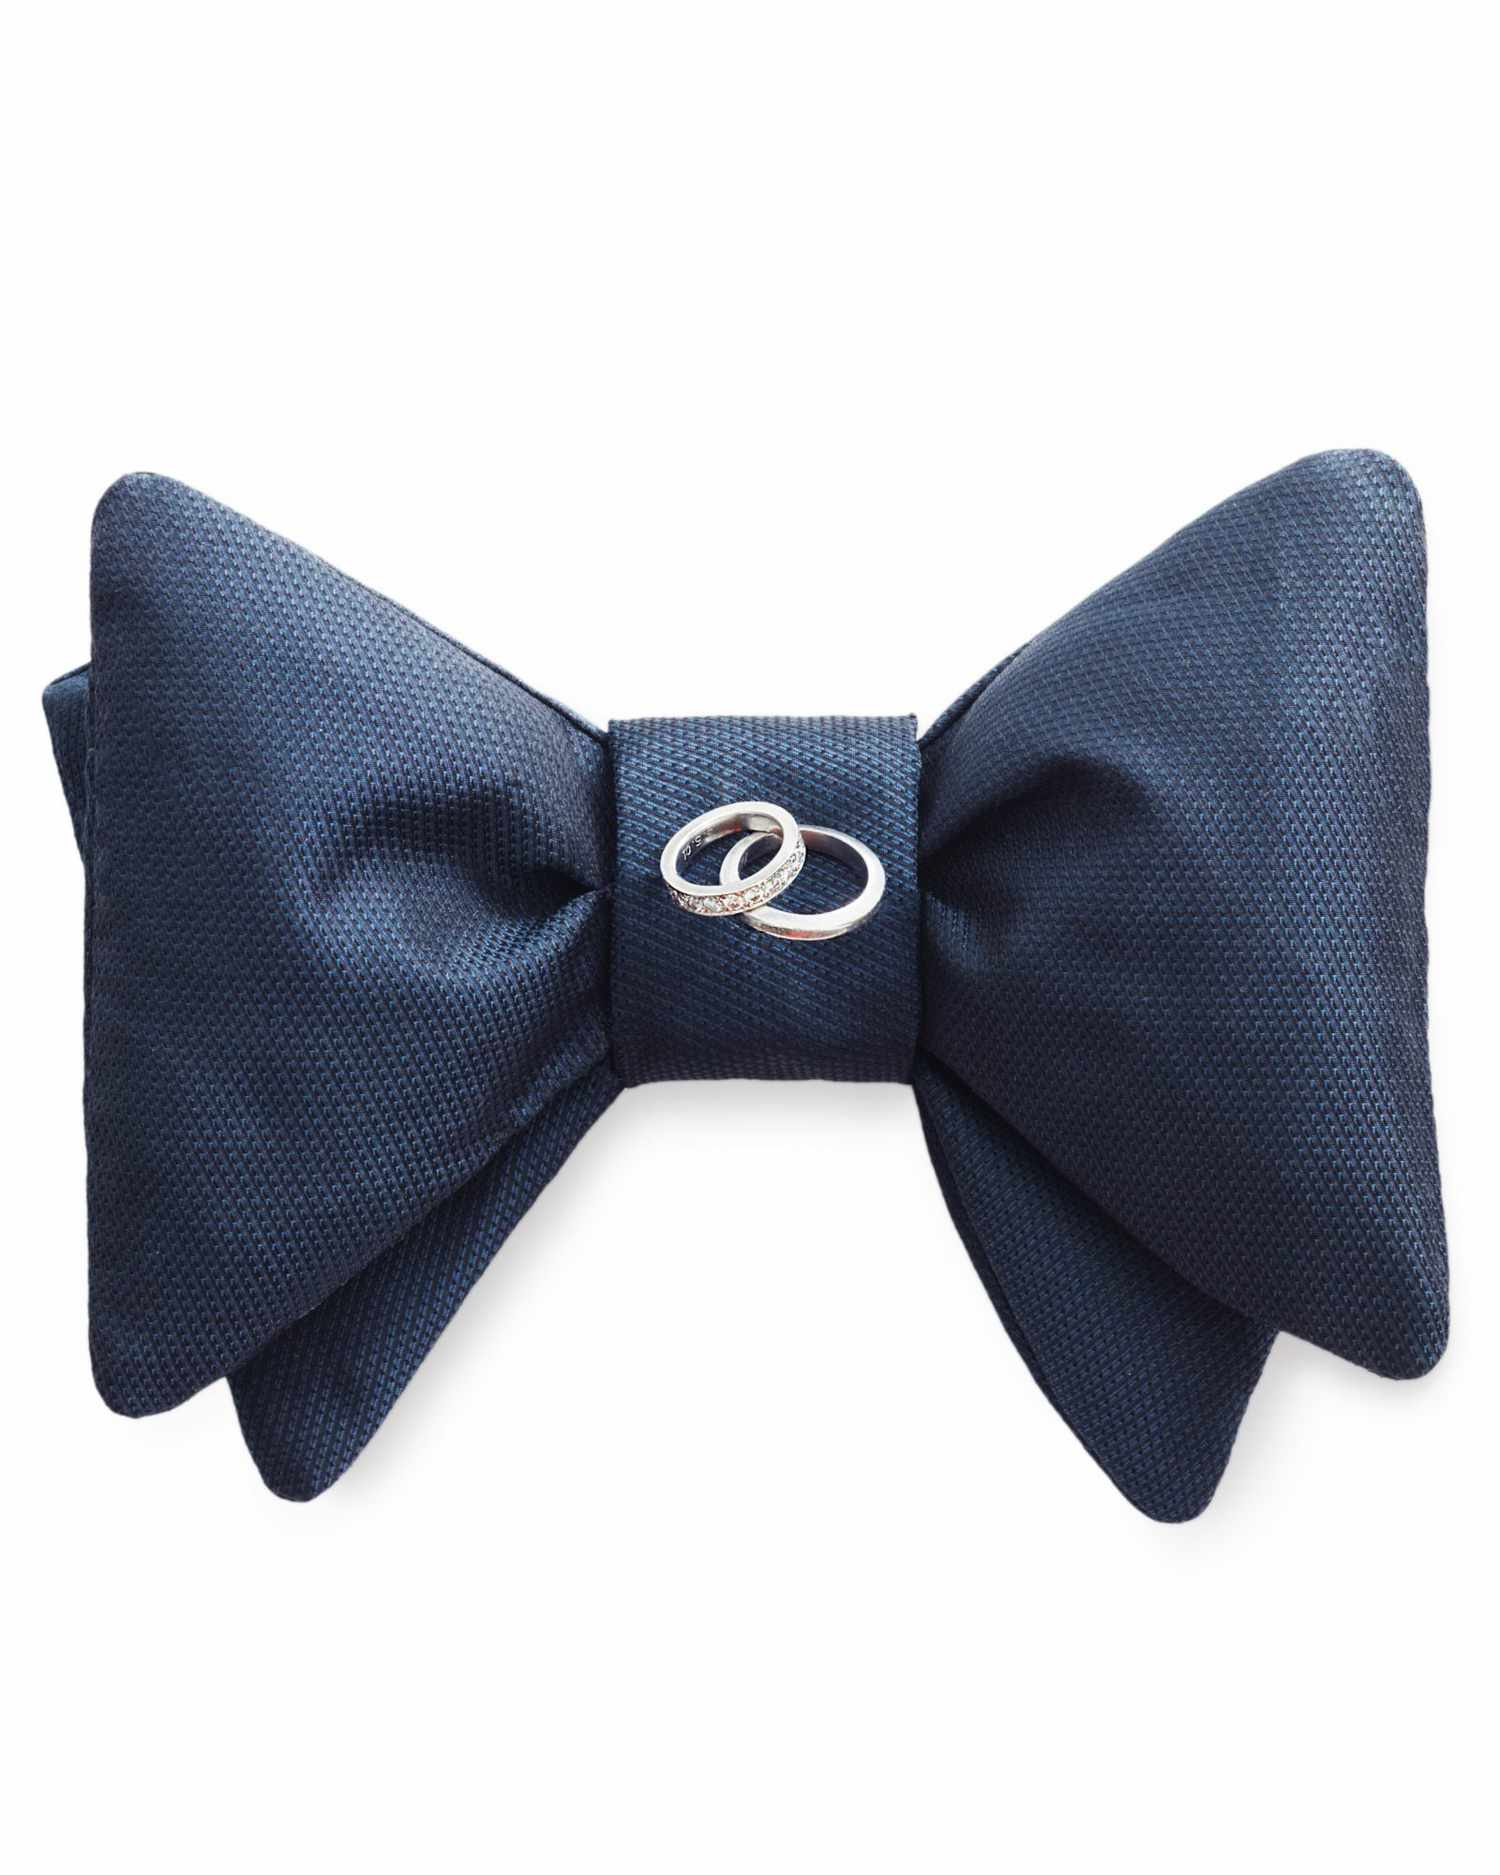 No-Sew Bow Tie Ring Pillow